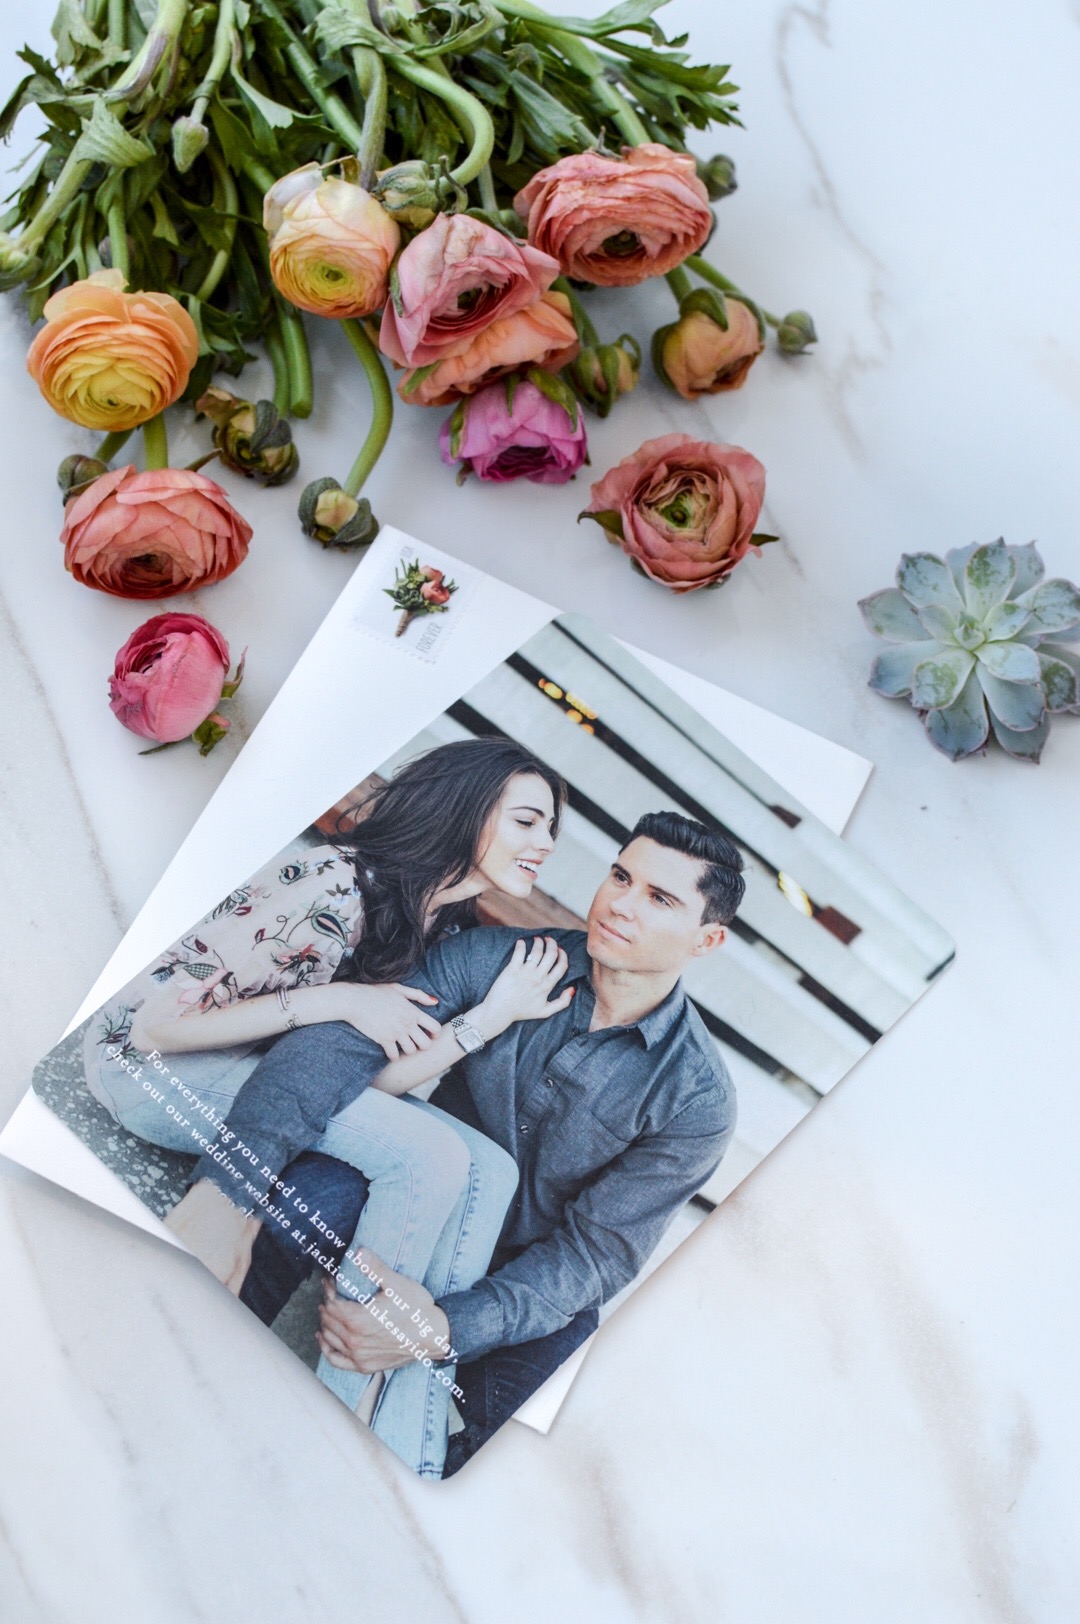 Jackie and Luke's Save the date from Minted